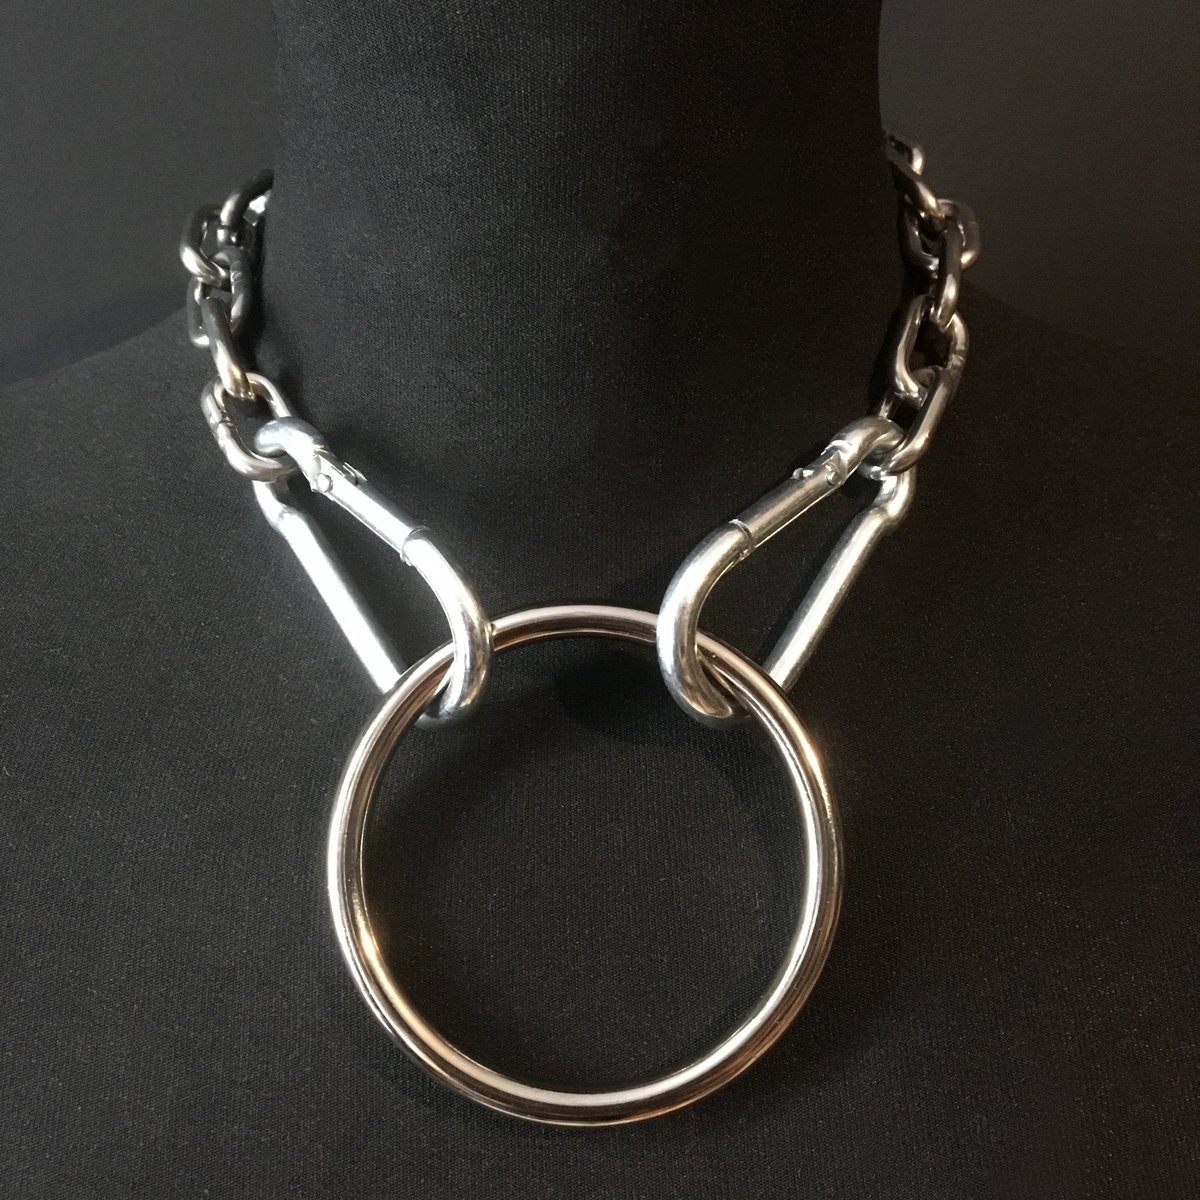 O ring necklace | TommyVowles